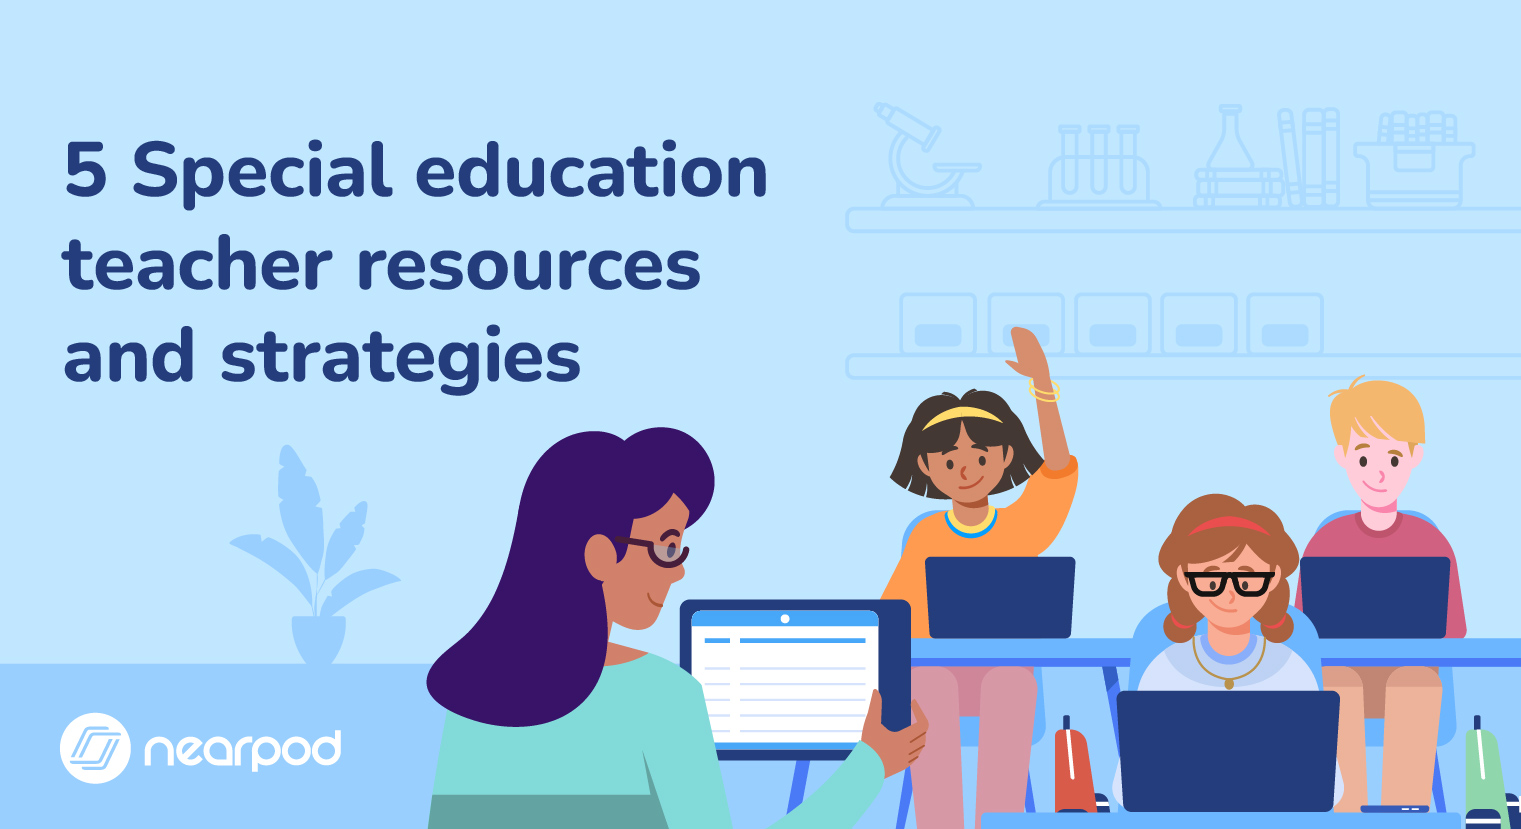 5 Special education teacher resources and strategies